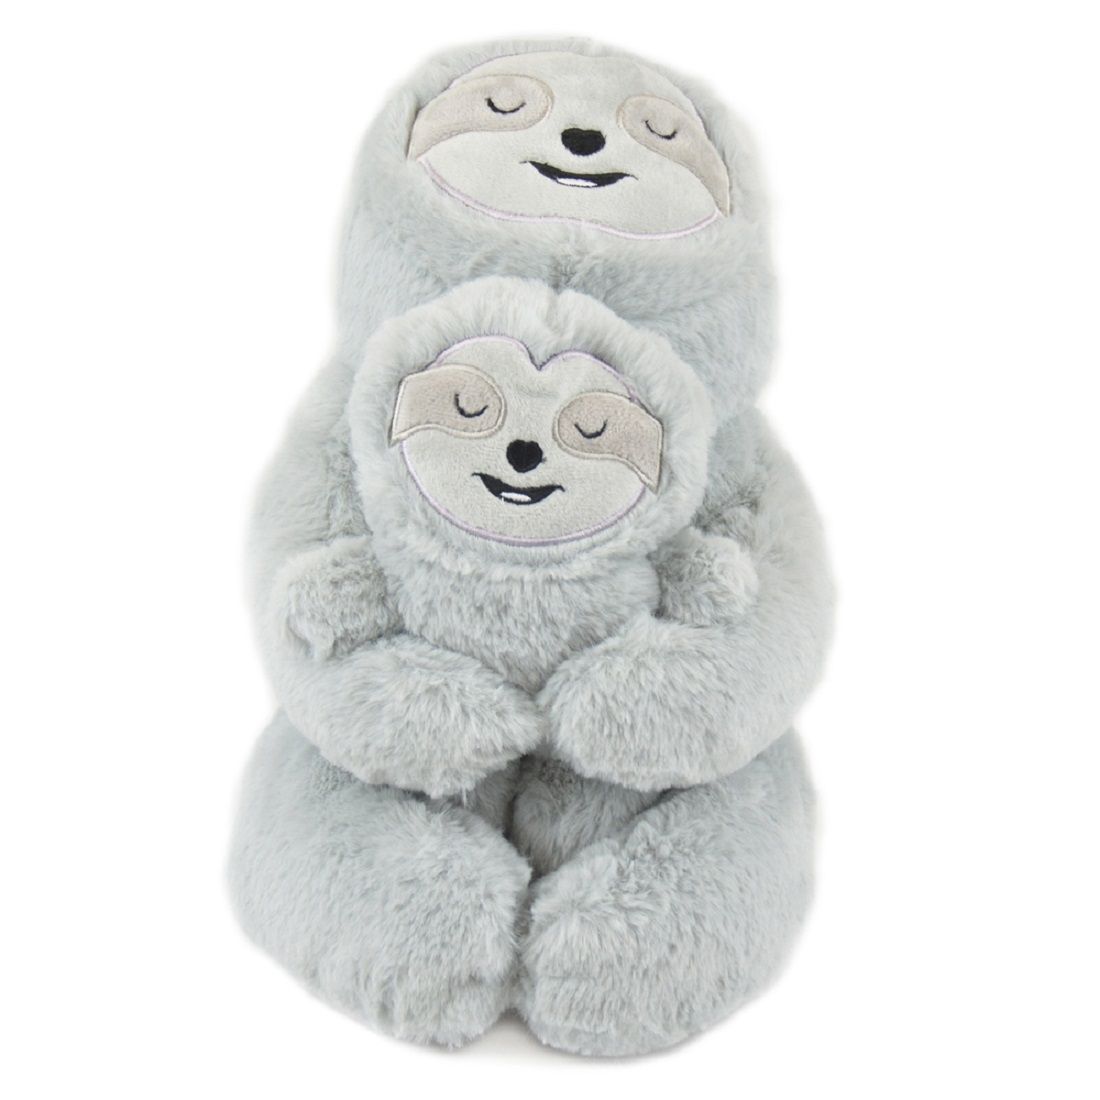 800ml Hot Water Bottle with Removable Sloth Mama and Baby Cover